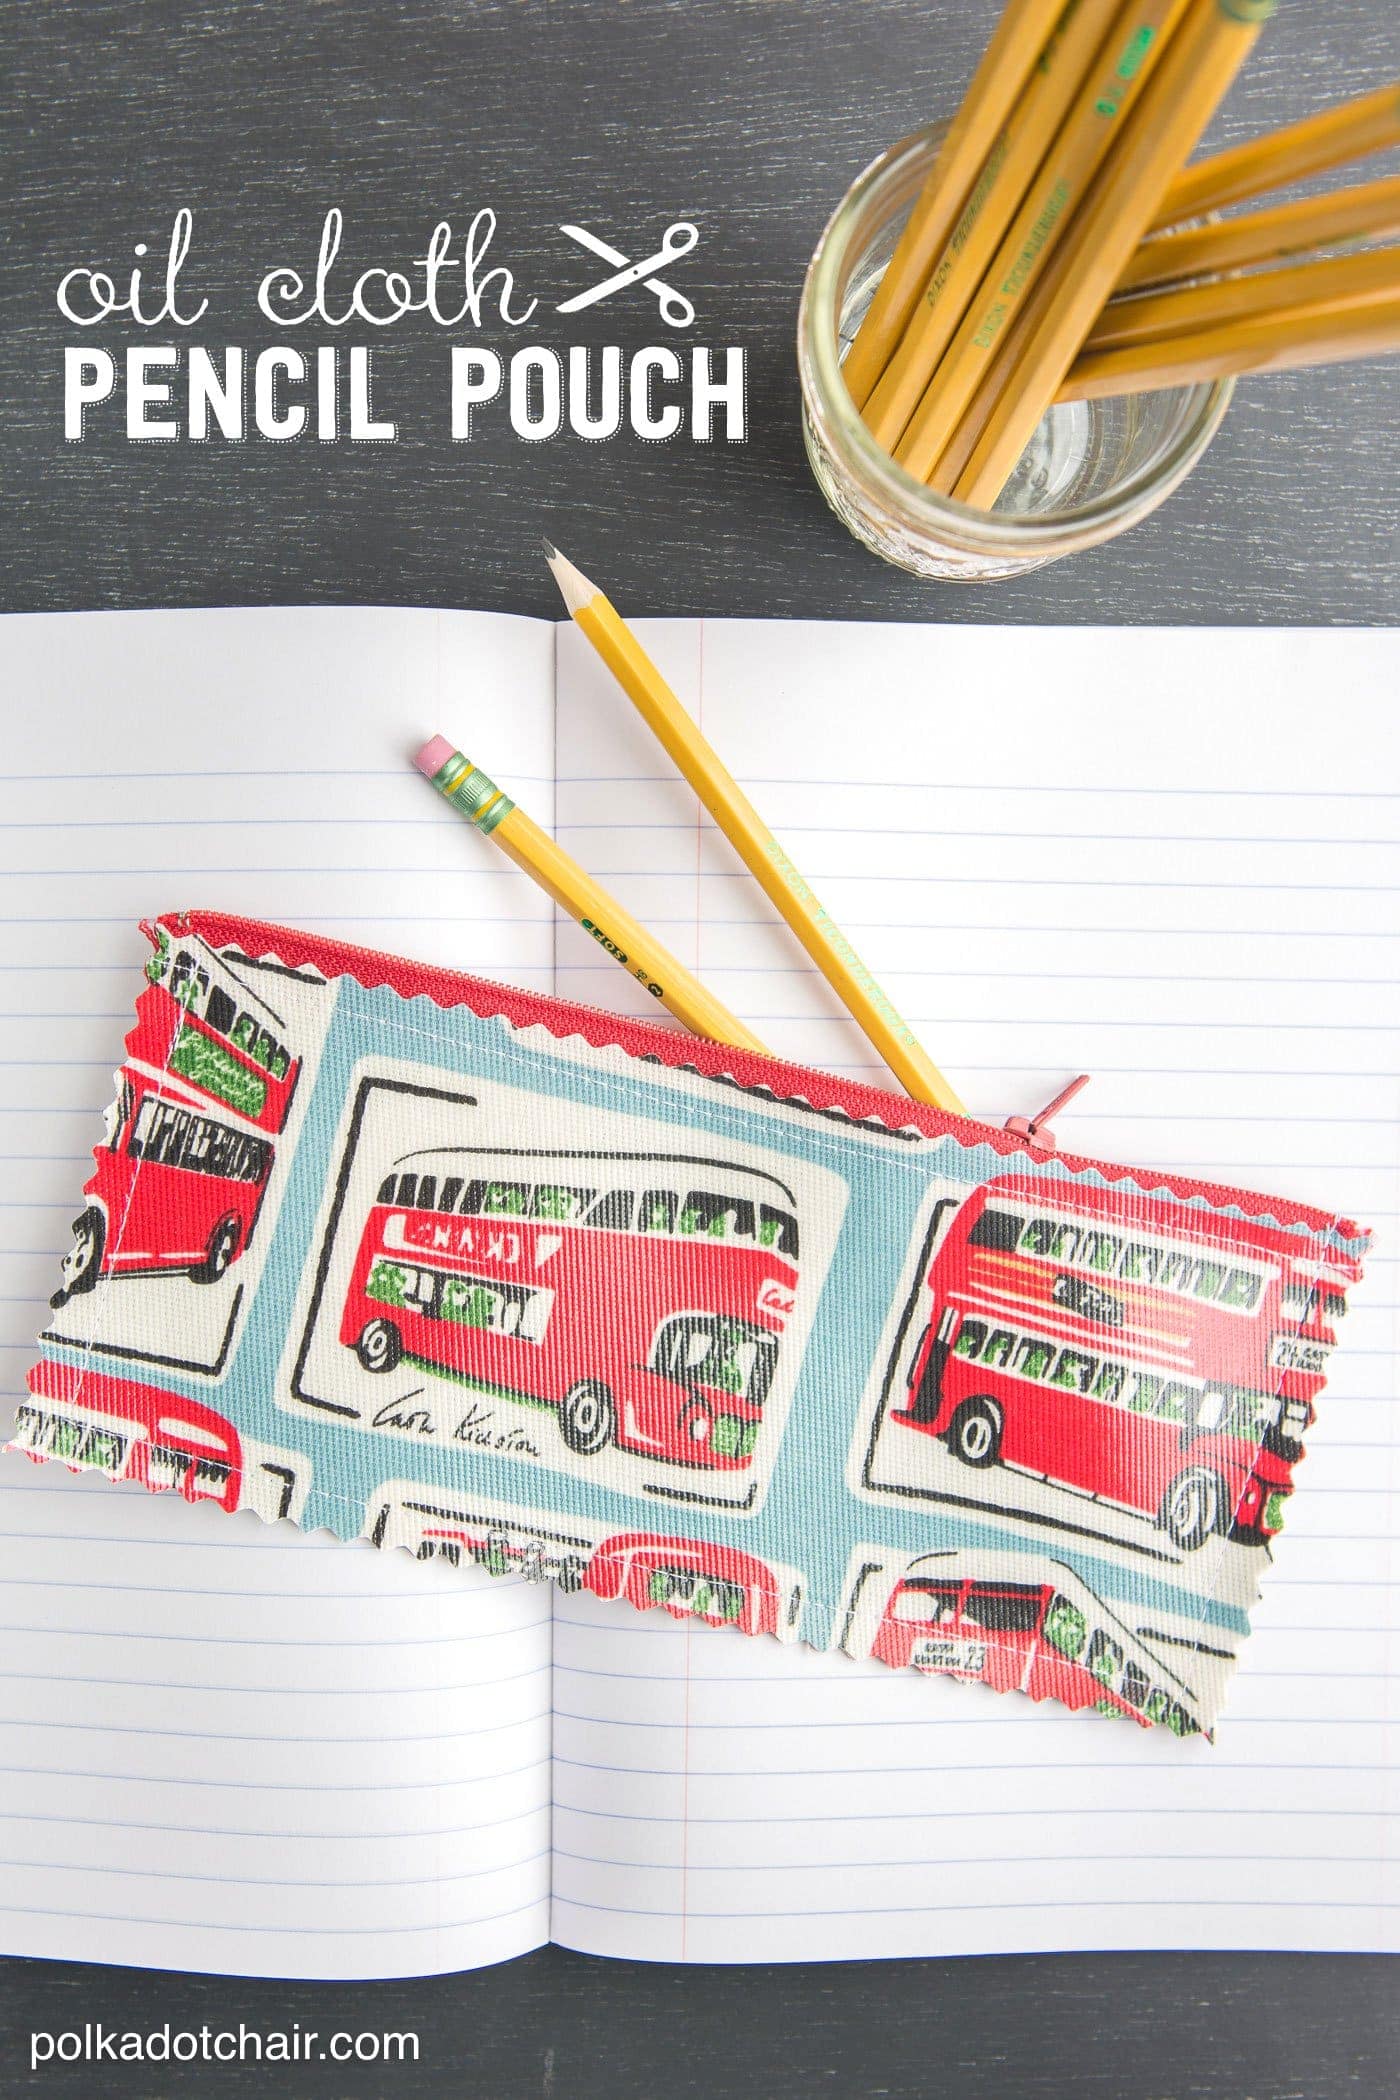 How to Sew an Oilcloth Pencil Pouch